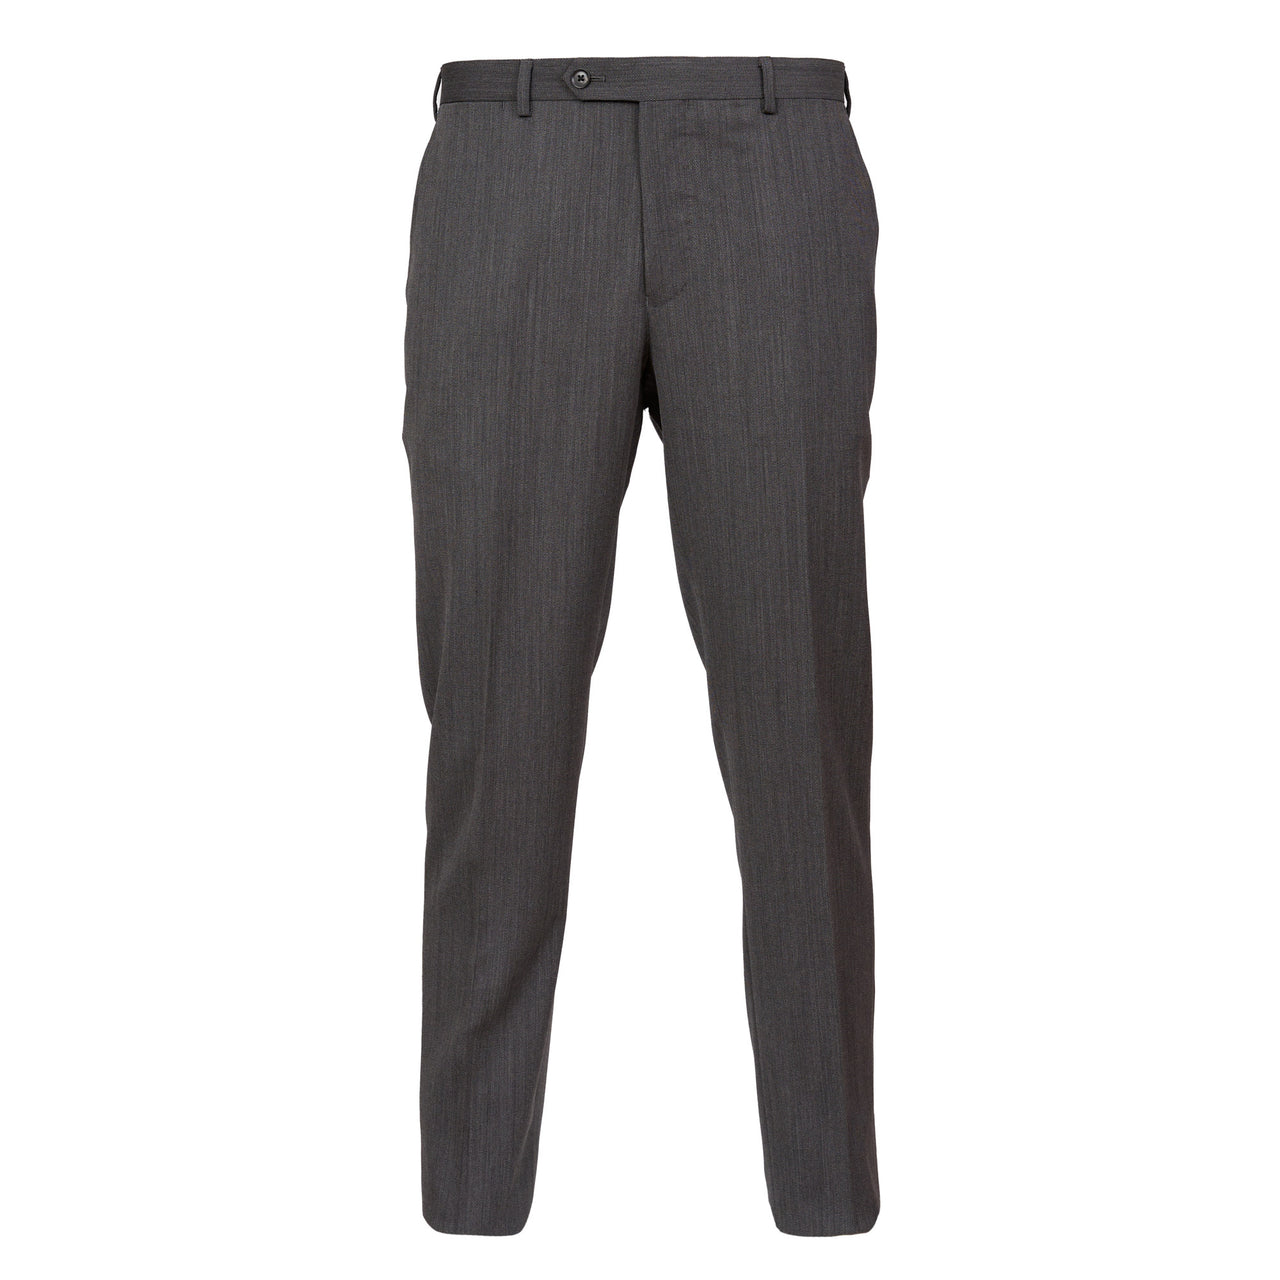 HENRY SARTORIAL Flat Front Twill Wool Trousers GREY REG